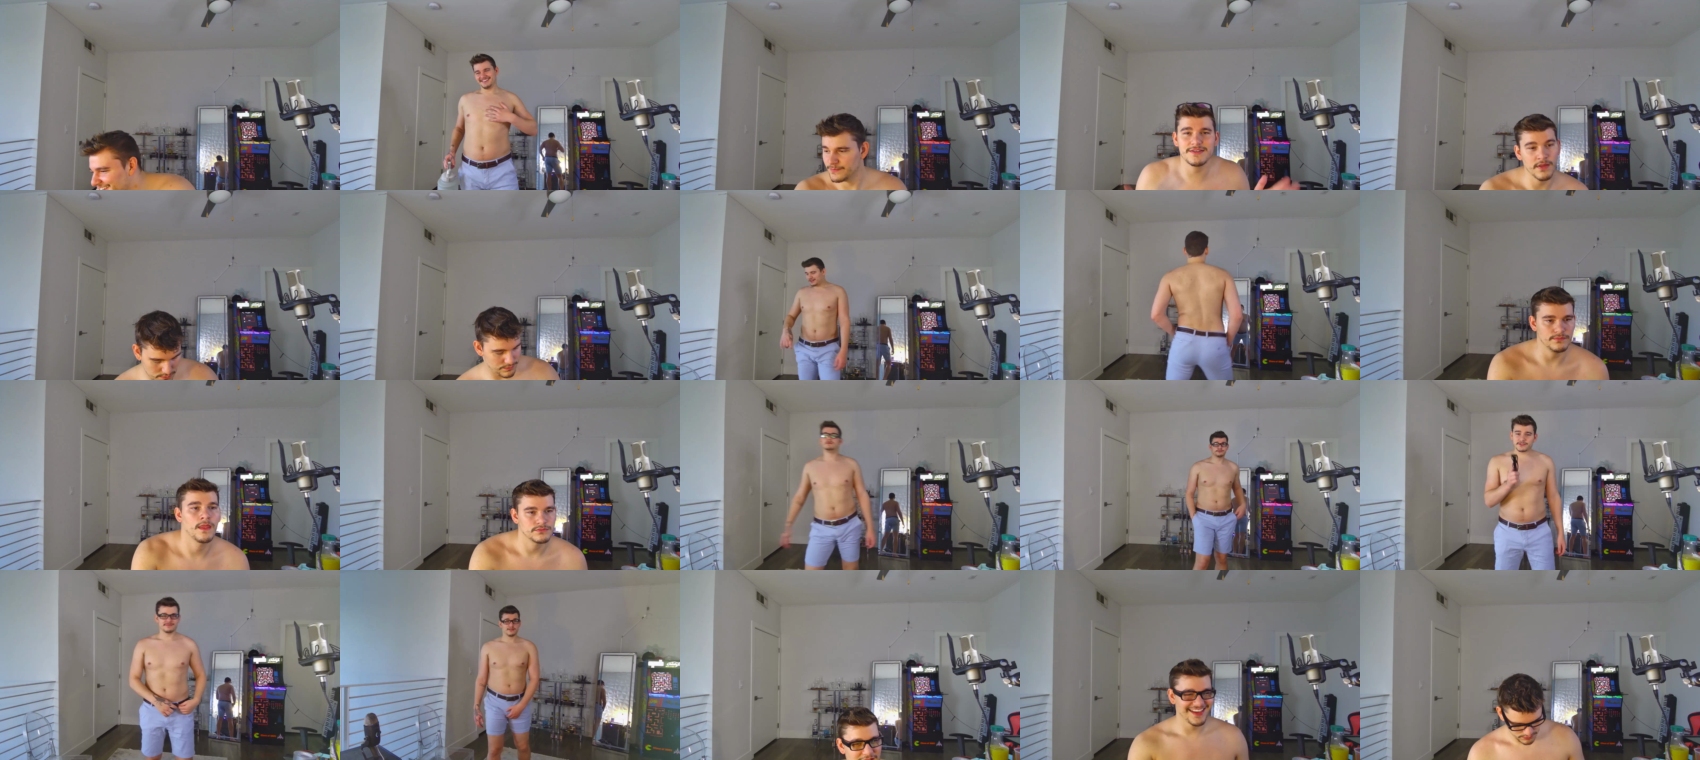 thejohnnystone  24-06-2022 Males Topless